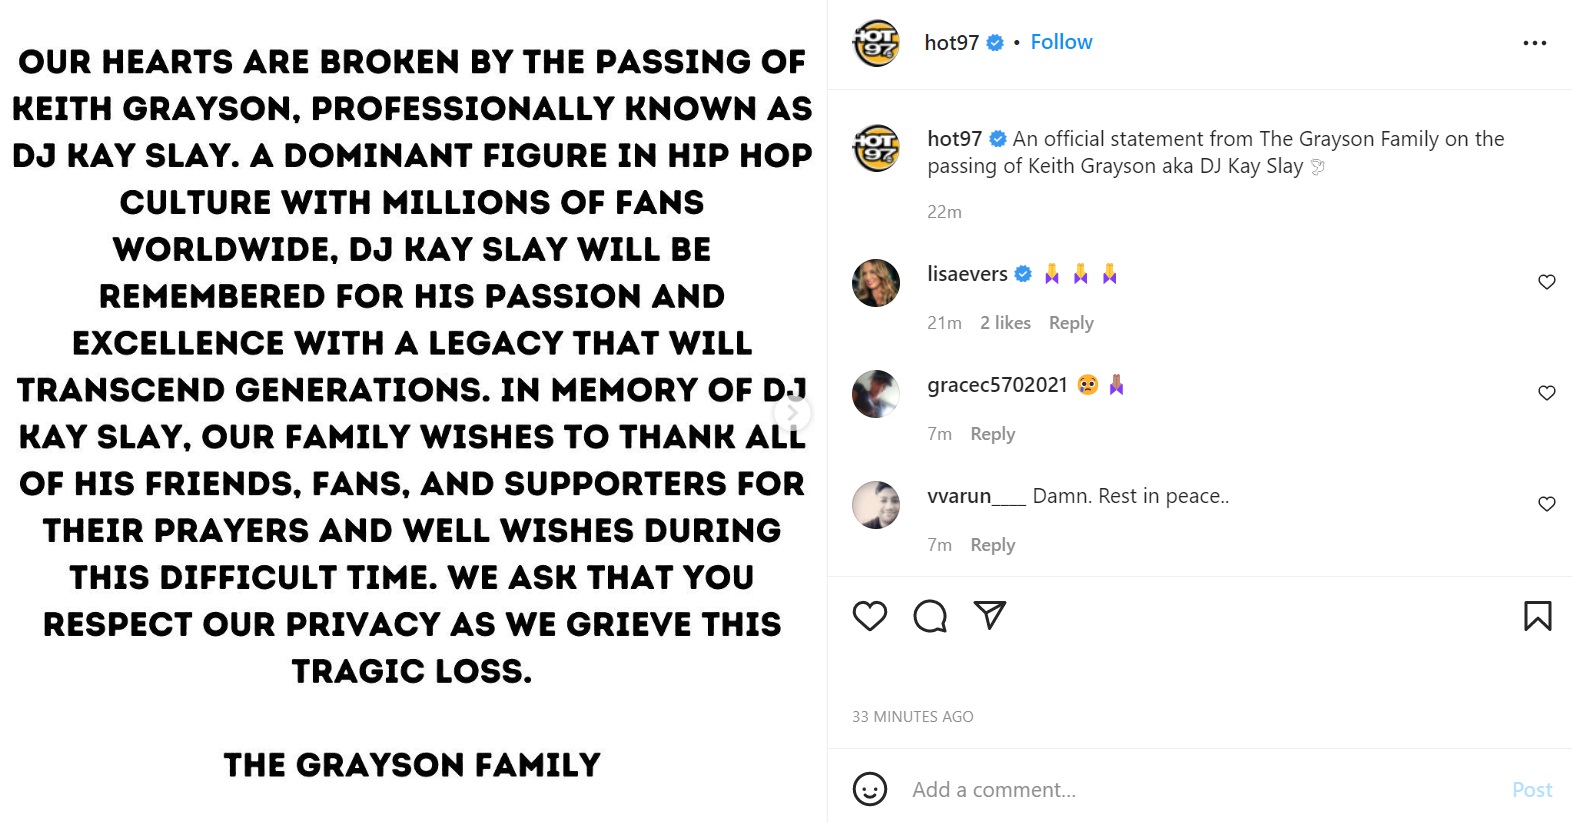 DJ Kay Slay's family releases statement on his death via Hot 97